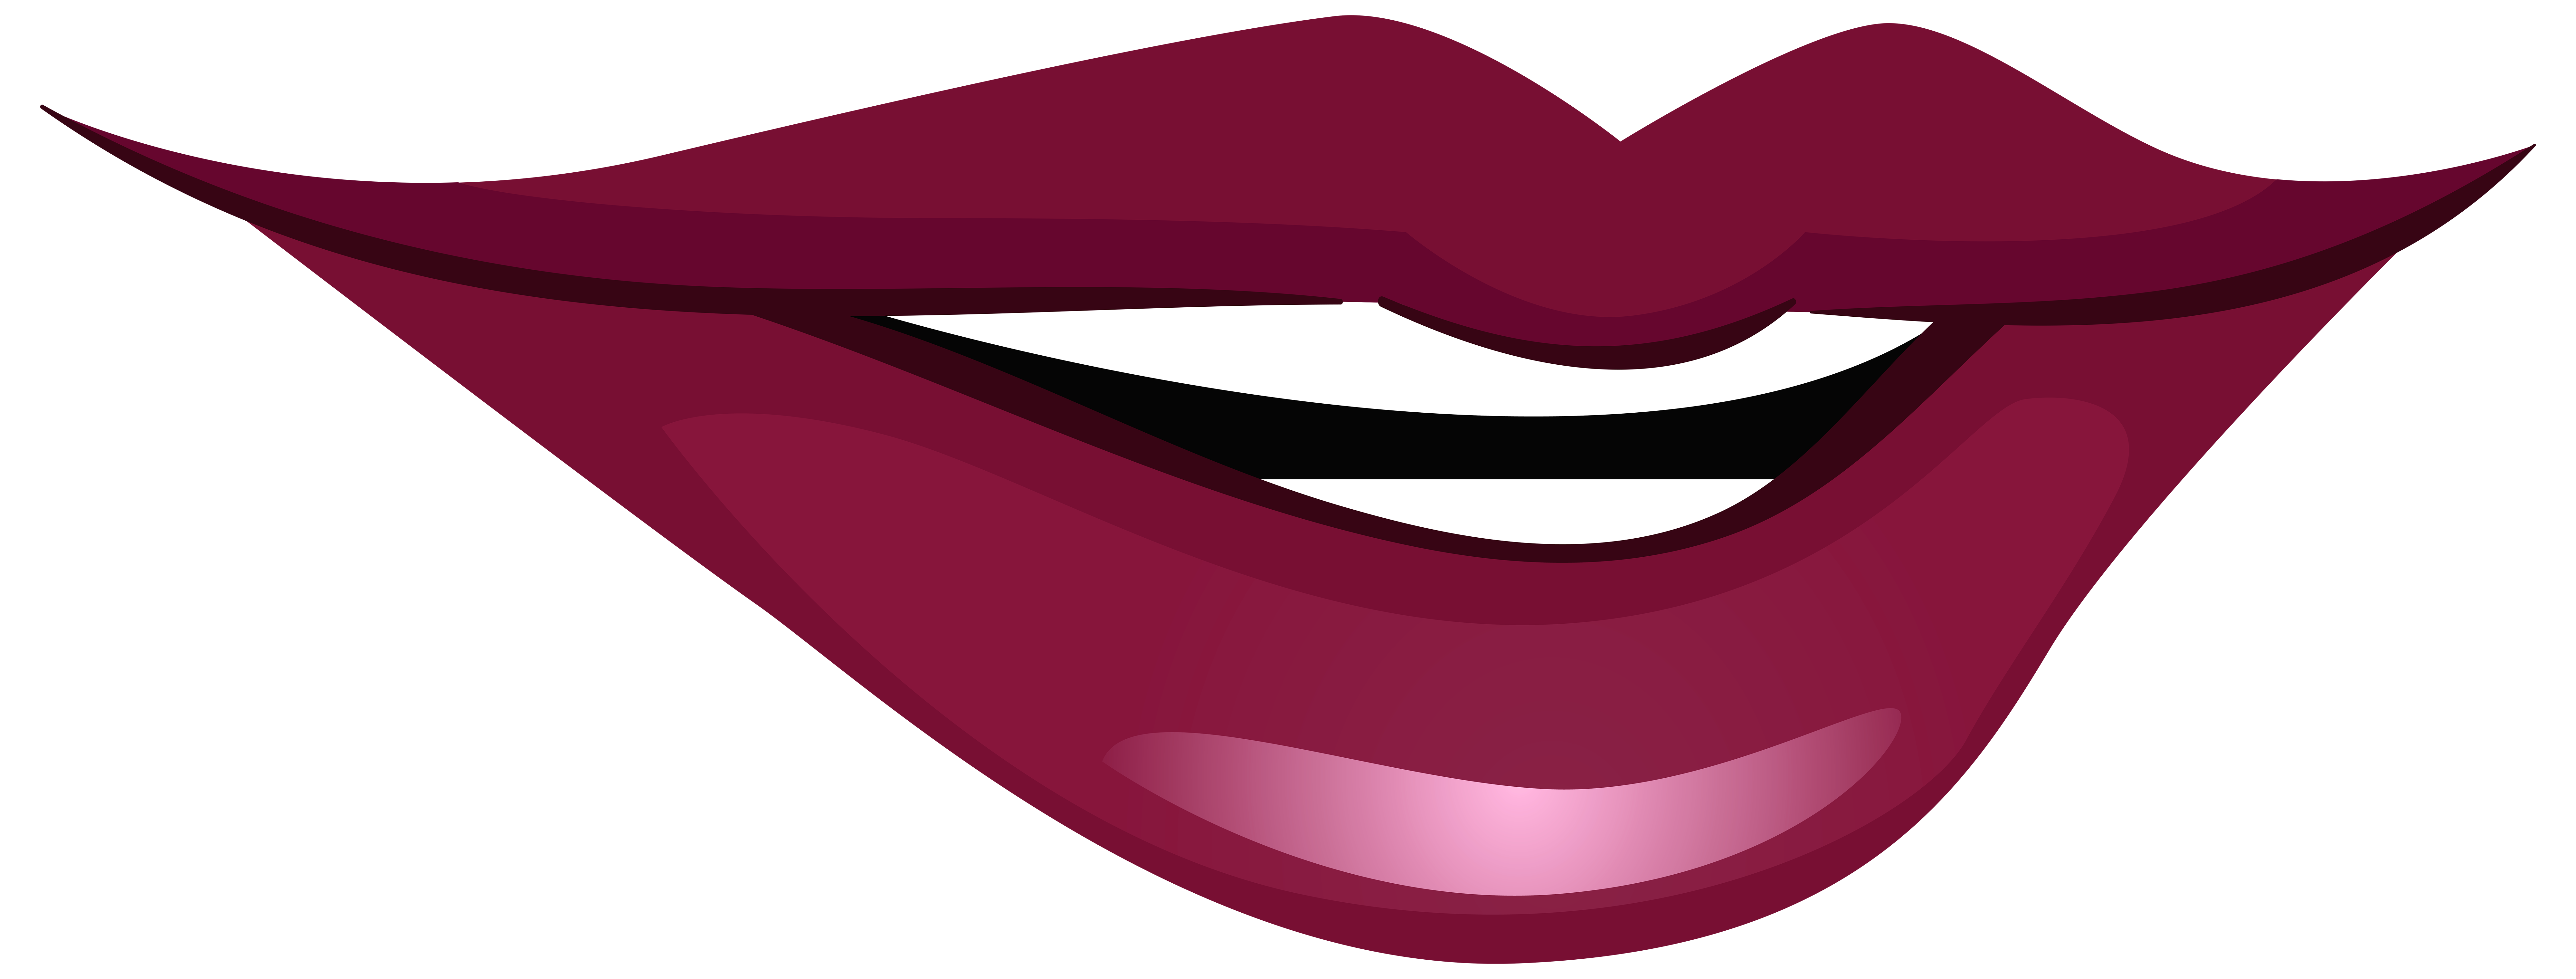 clipart mouth hand over